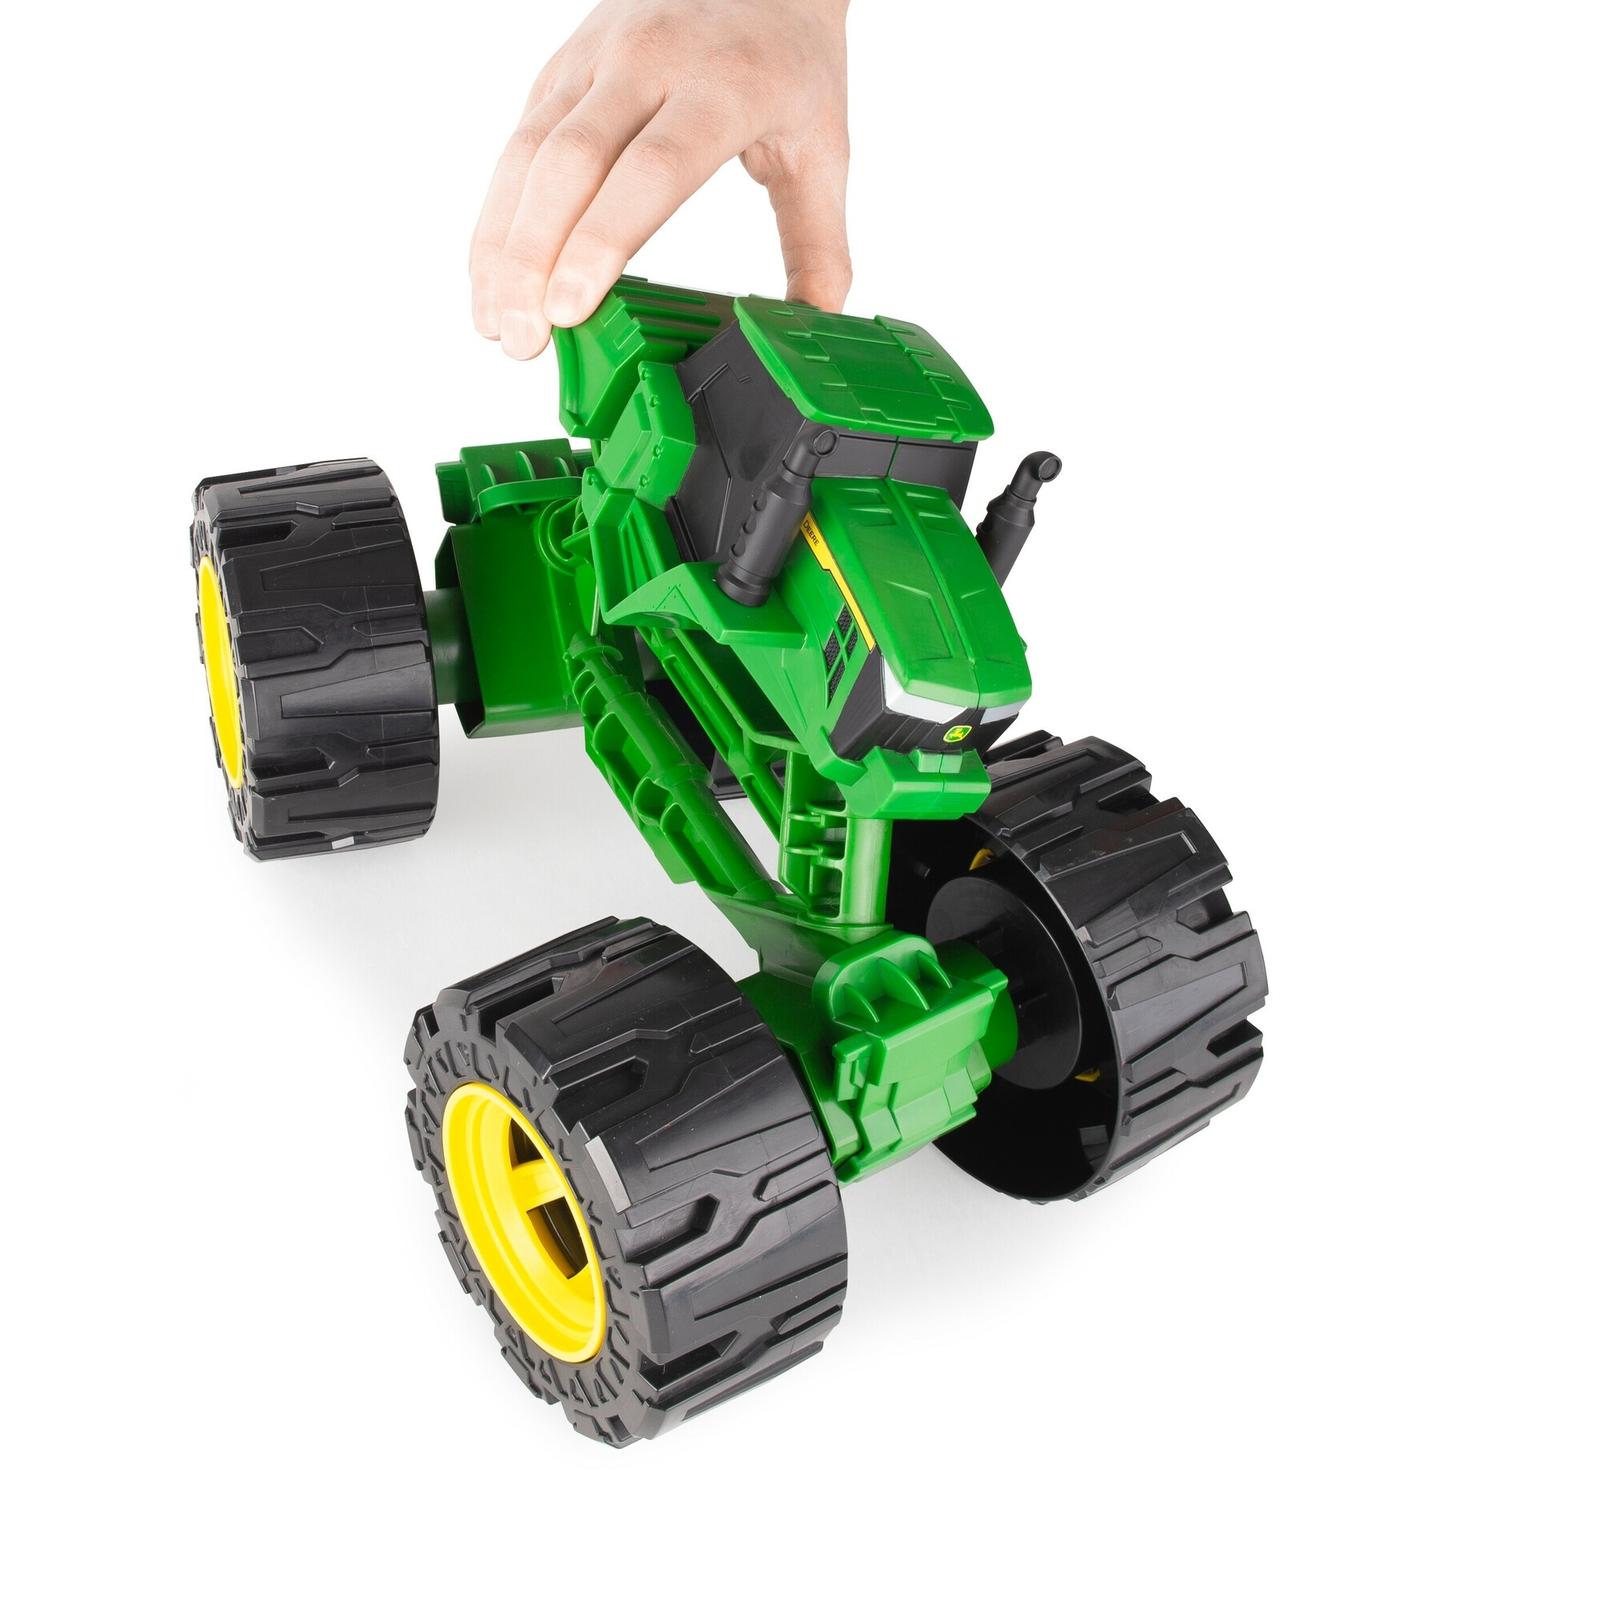 John Deere Monster Treads 12 Inch Tractor Toy arial view